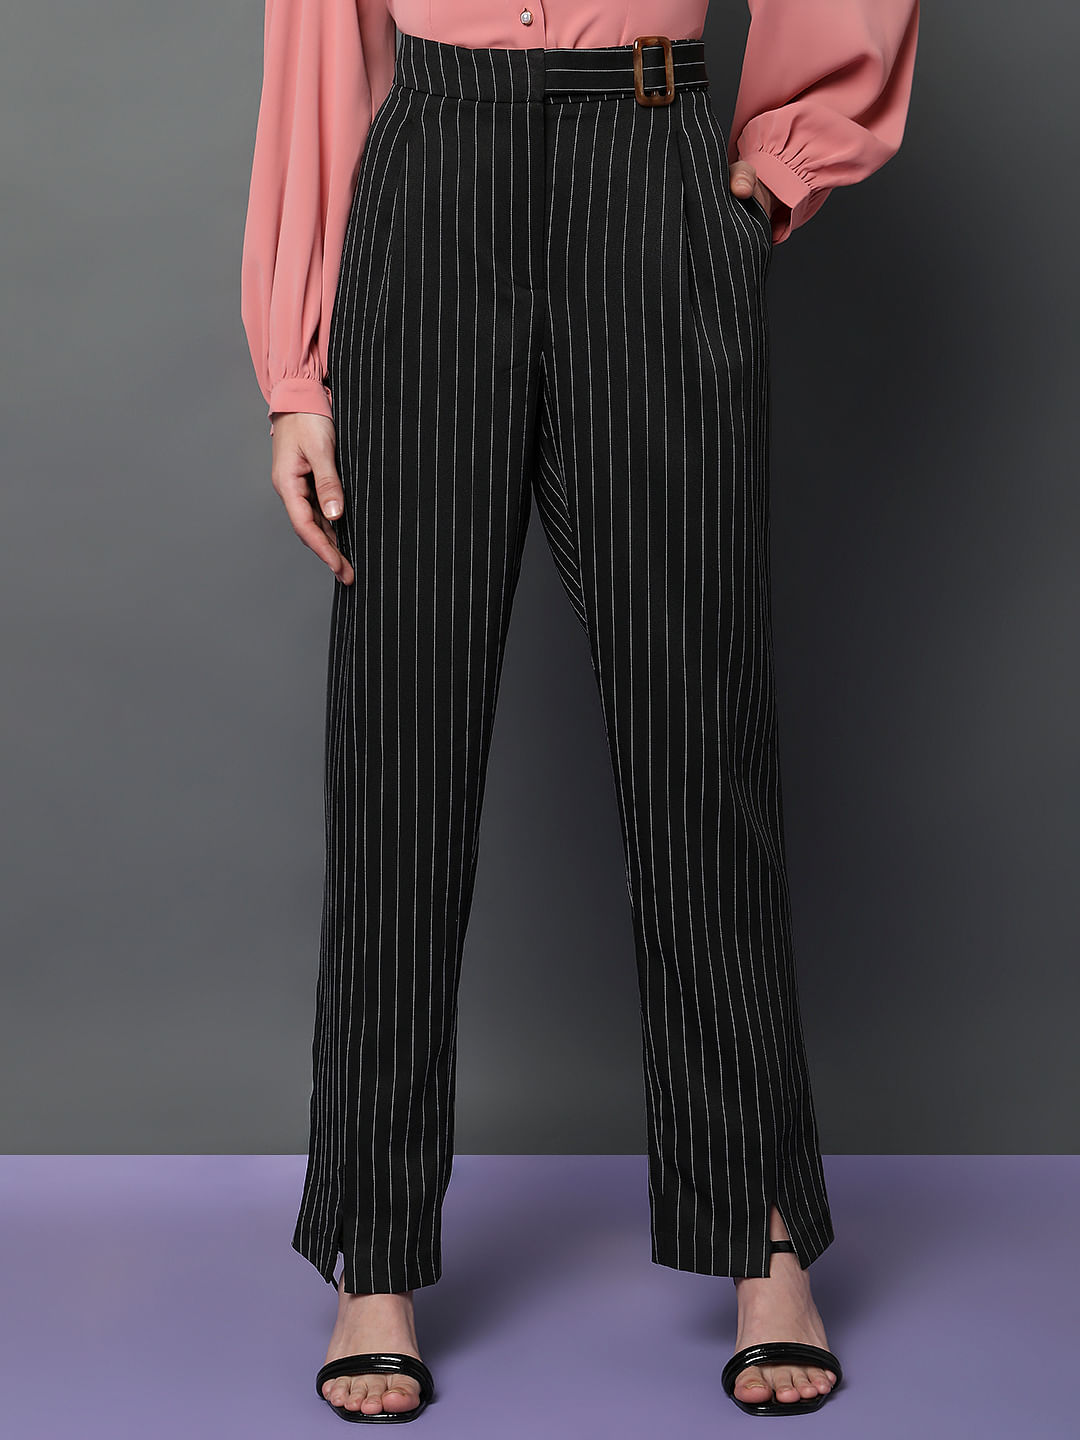 What to wear with black and white striped pants Outfits and tips  Fashion  Rules  Black and white pants Black and white striped trousers Striped  pants women